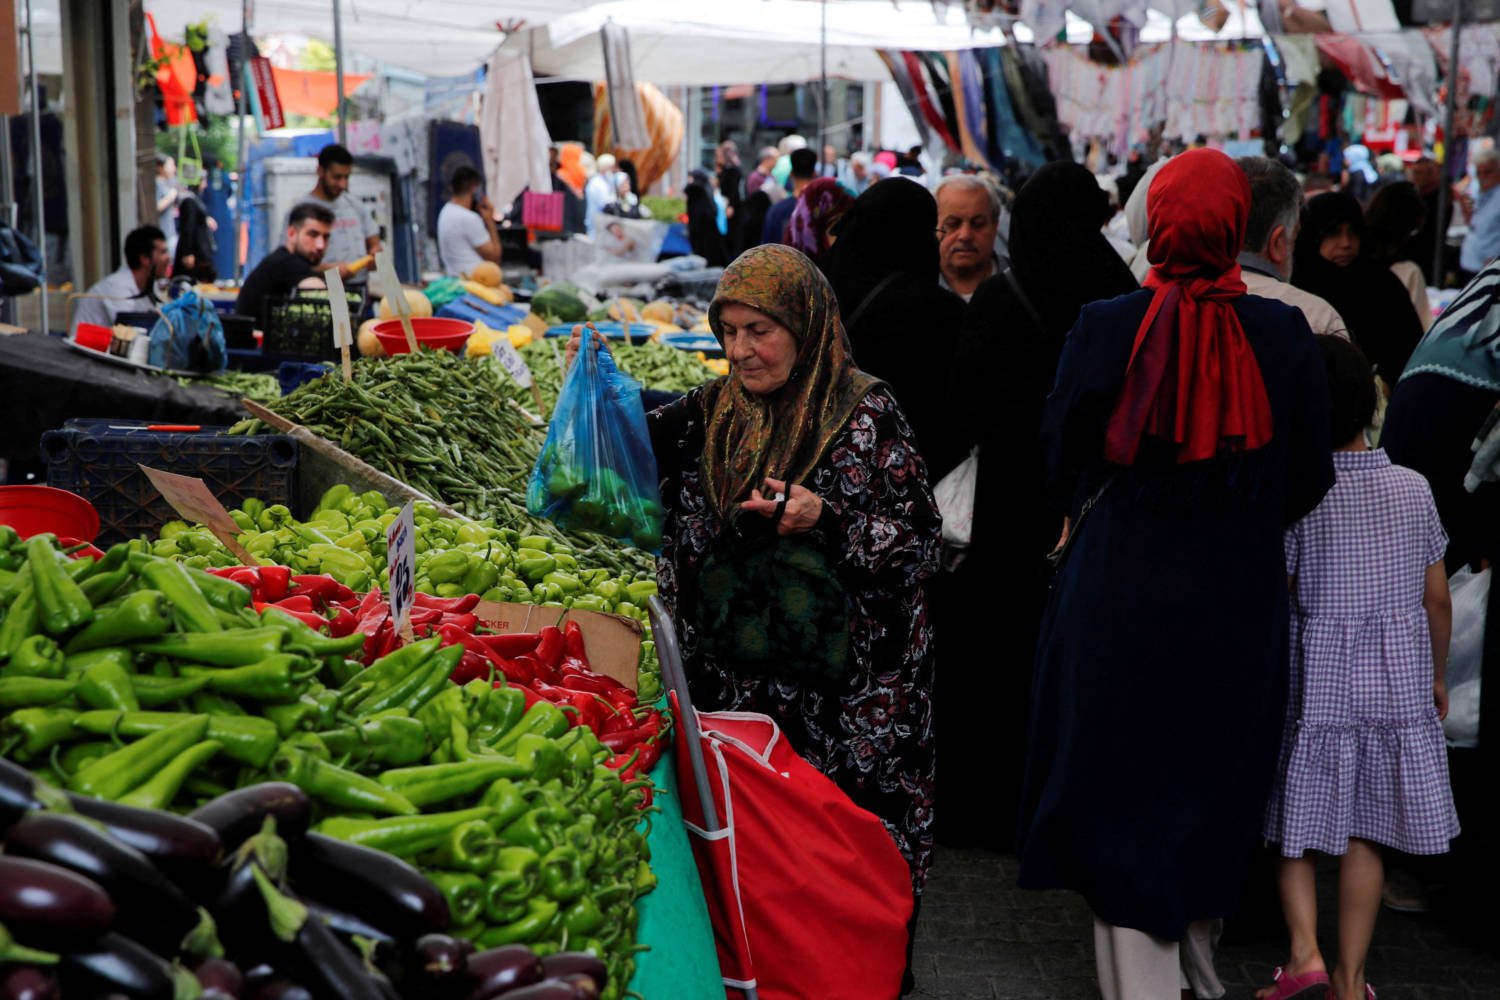 File Photo: People Shop At A Fresh Market In Istanbul, Turkey